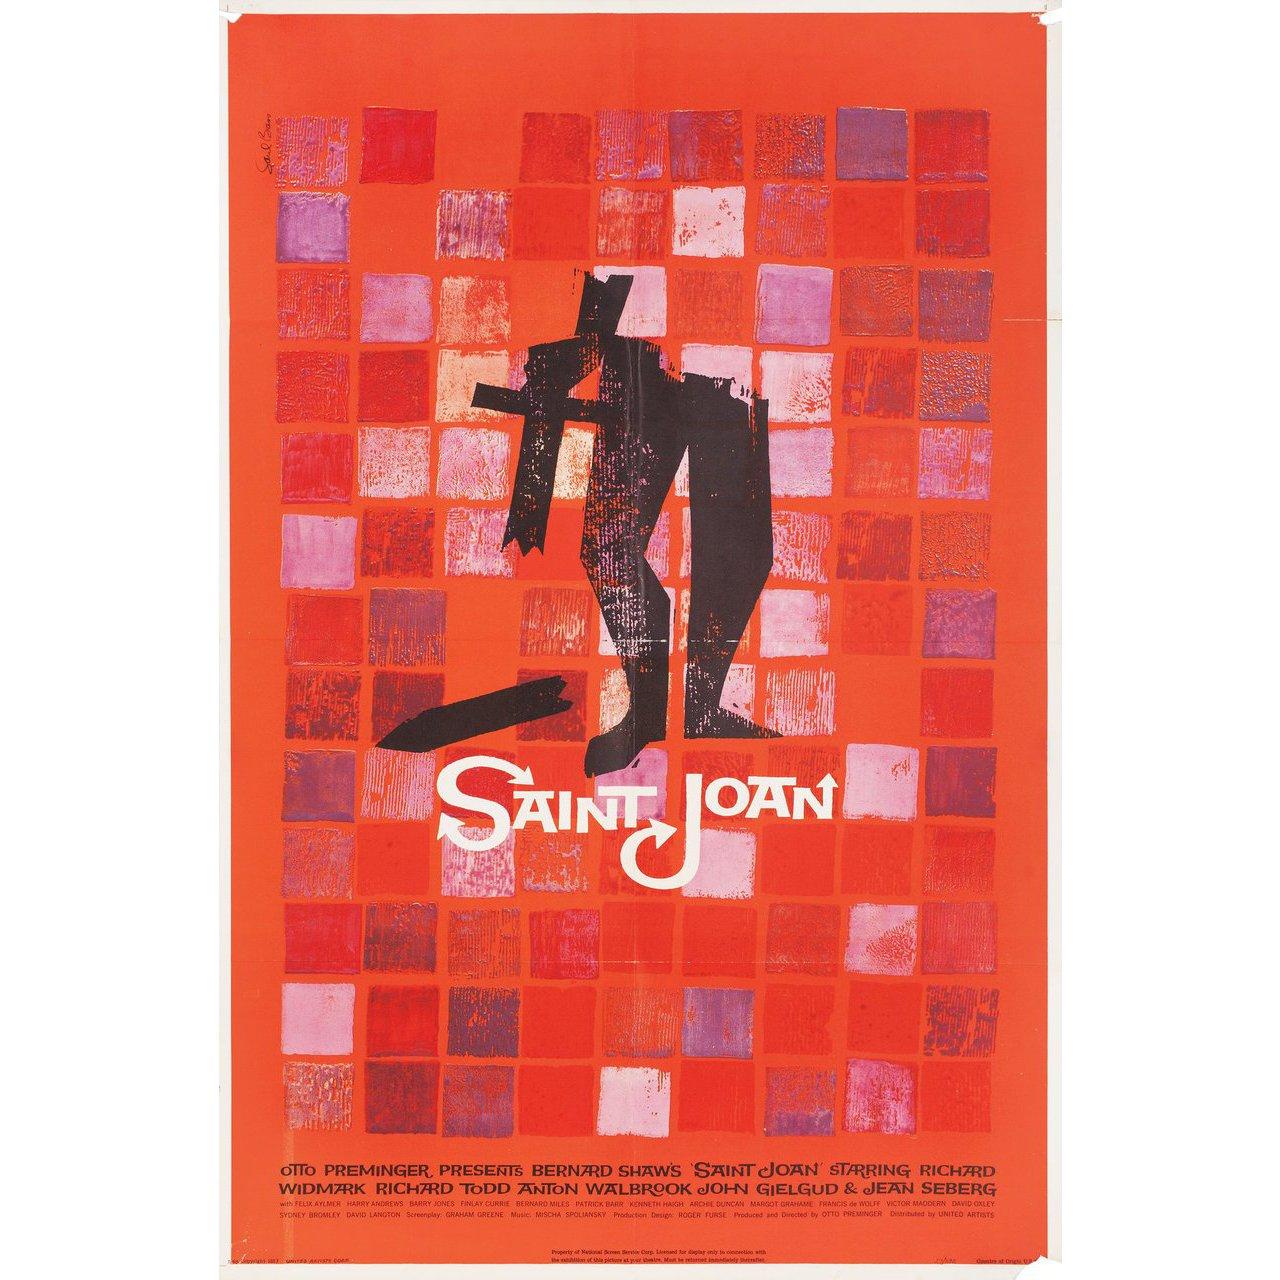 Original 1957 U.S. one sheet poster by Saul Bass for the film Saint Joan directed by Otto Preminger with Jean Seberg / Richard Widmark / Richard Todd / Anton Walbrook / John Gielgud. Good-Very Good condition, folded with fold & corner wear. Many